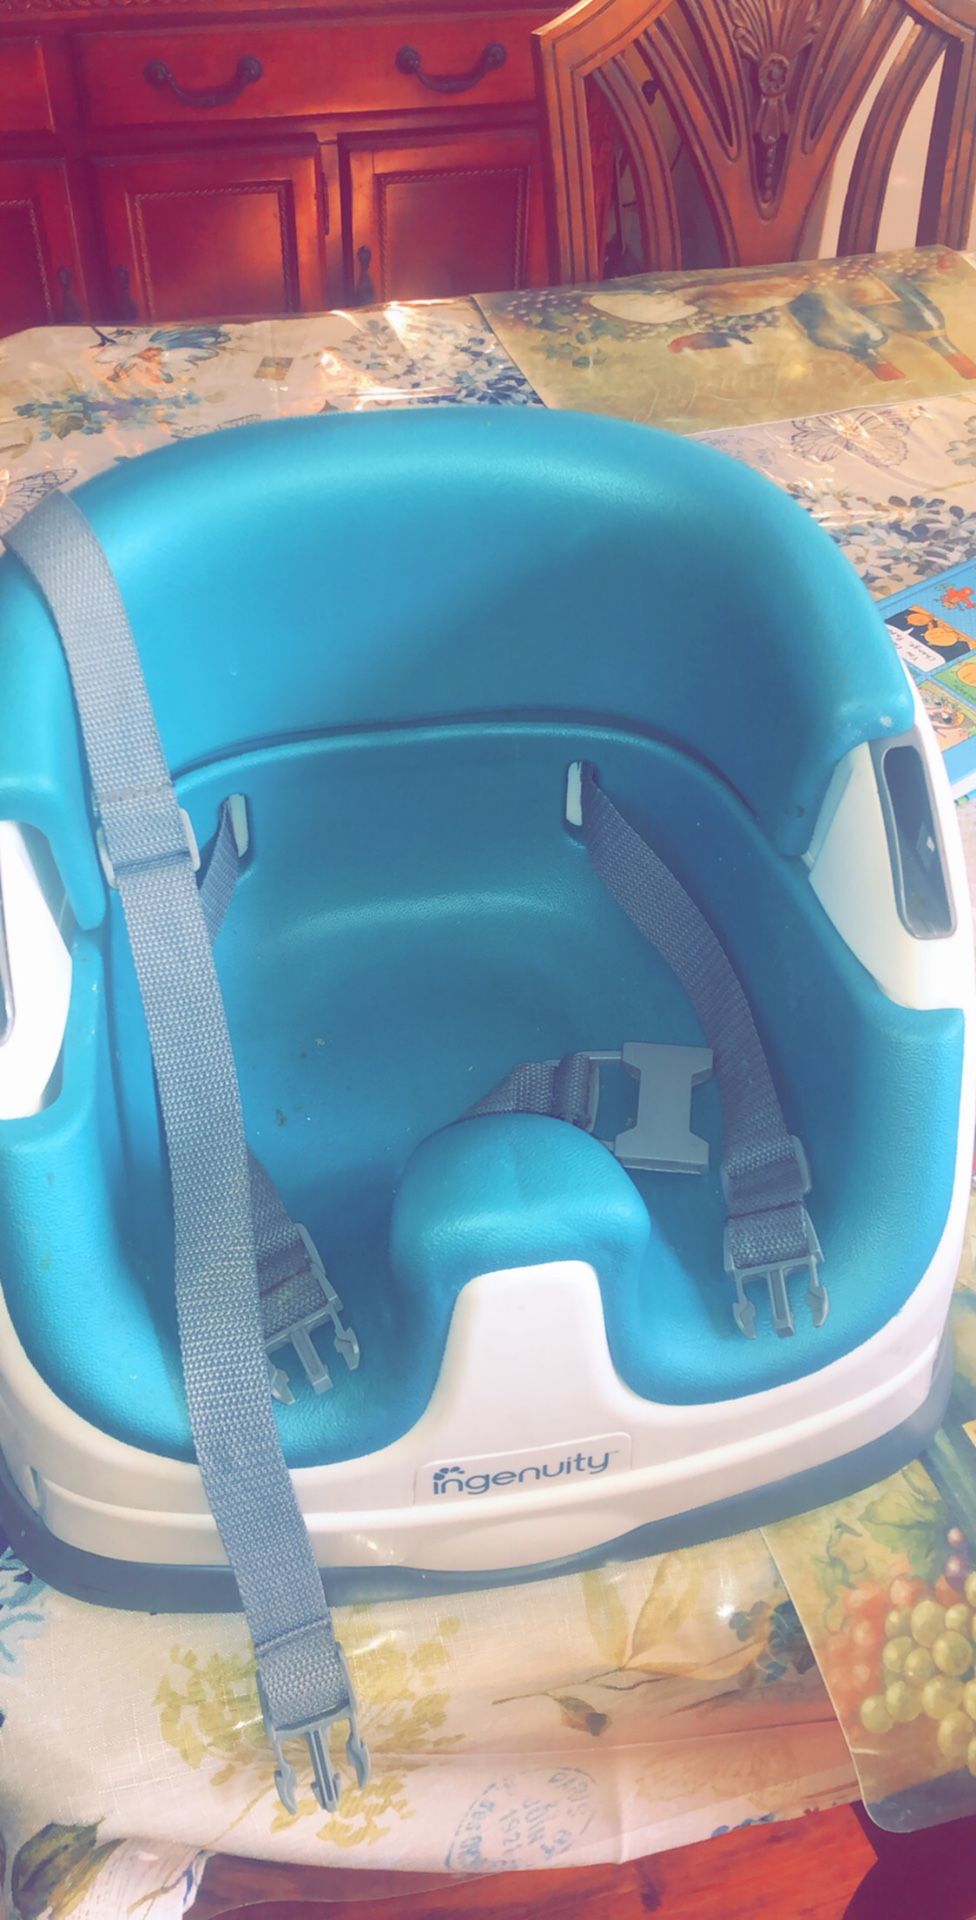 For sale ingenuity baby booster seat for toddler $15 sold as is thanks